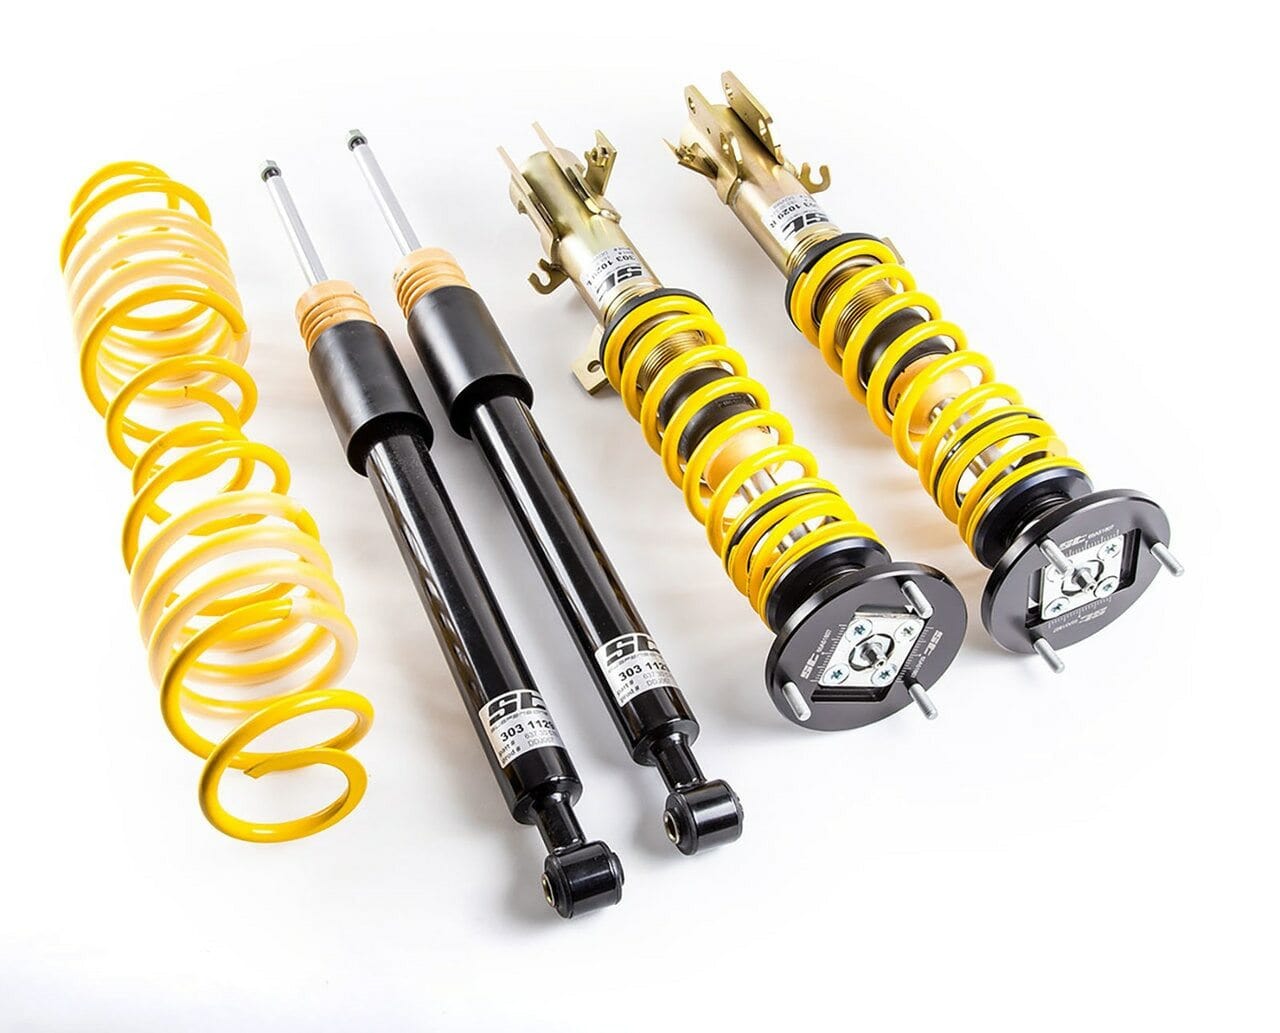 ST Suspension ST XTA Coilovers - 2007-2013 Mini Cooper S JCW Exclude Clubman RCW; 1.6T 4cyl (R56) SKU 18220850